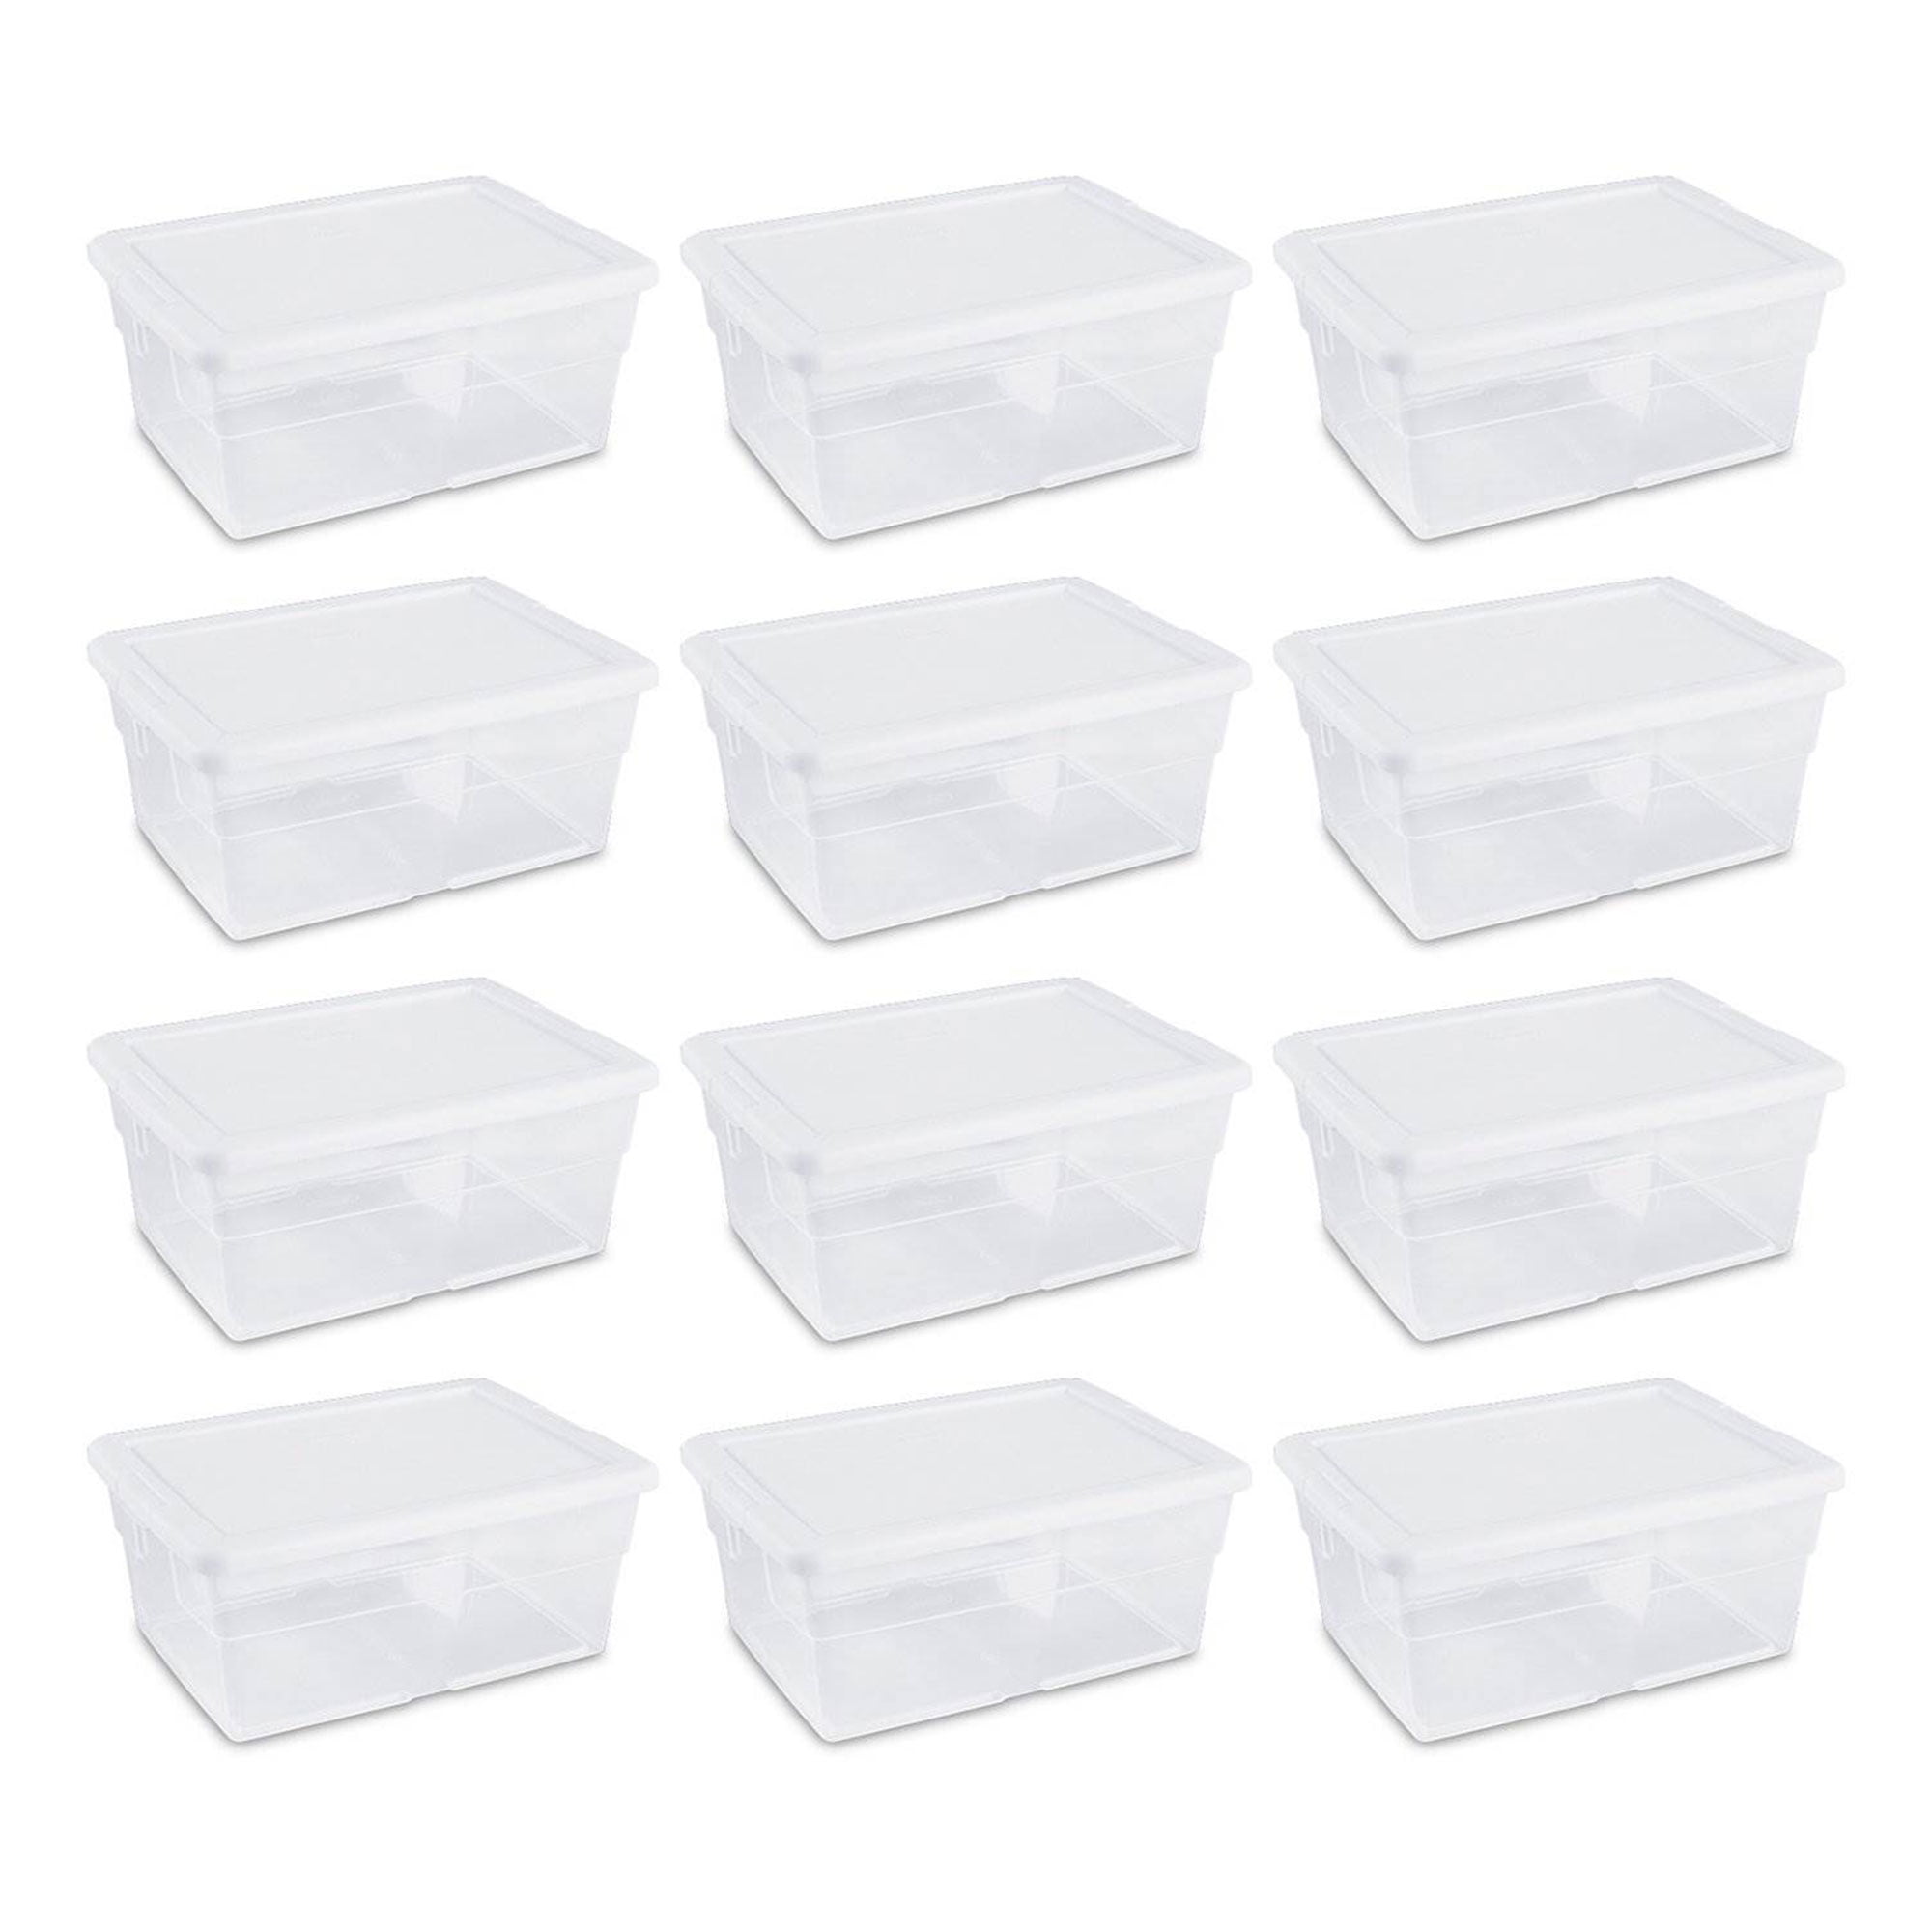 STRONG OFFICE USE STACKABLE BOXES SMALL MEDIUM LARGE PLASTIC STORAGE BOXES 